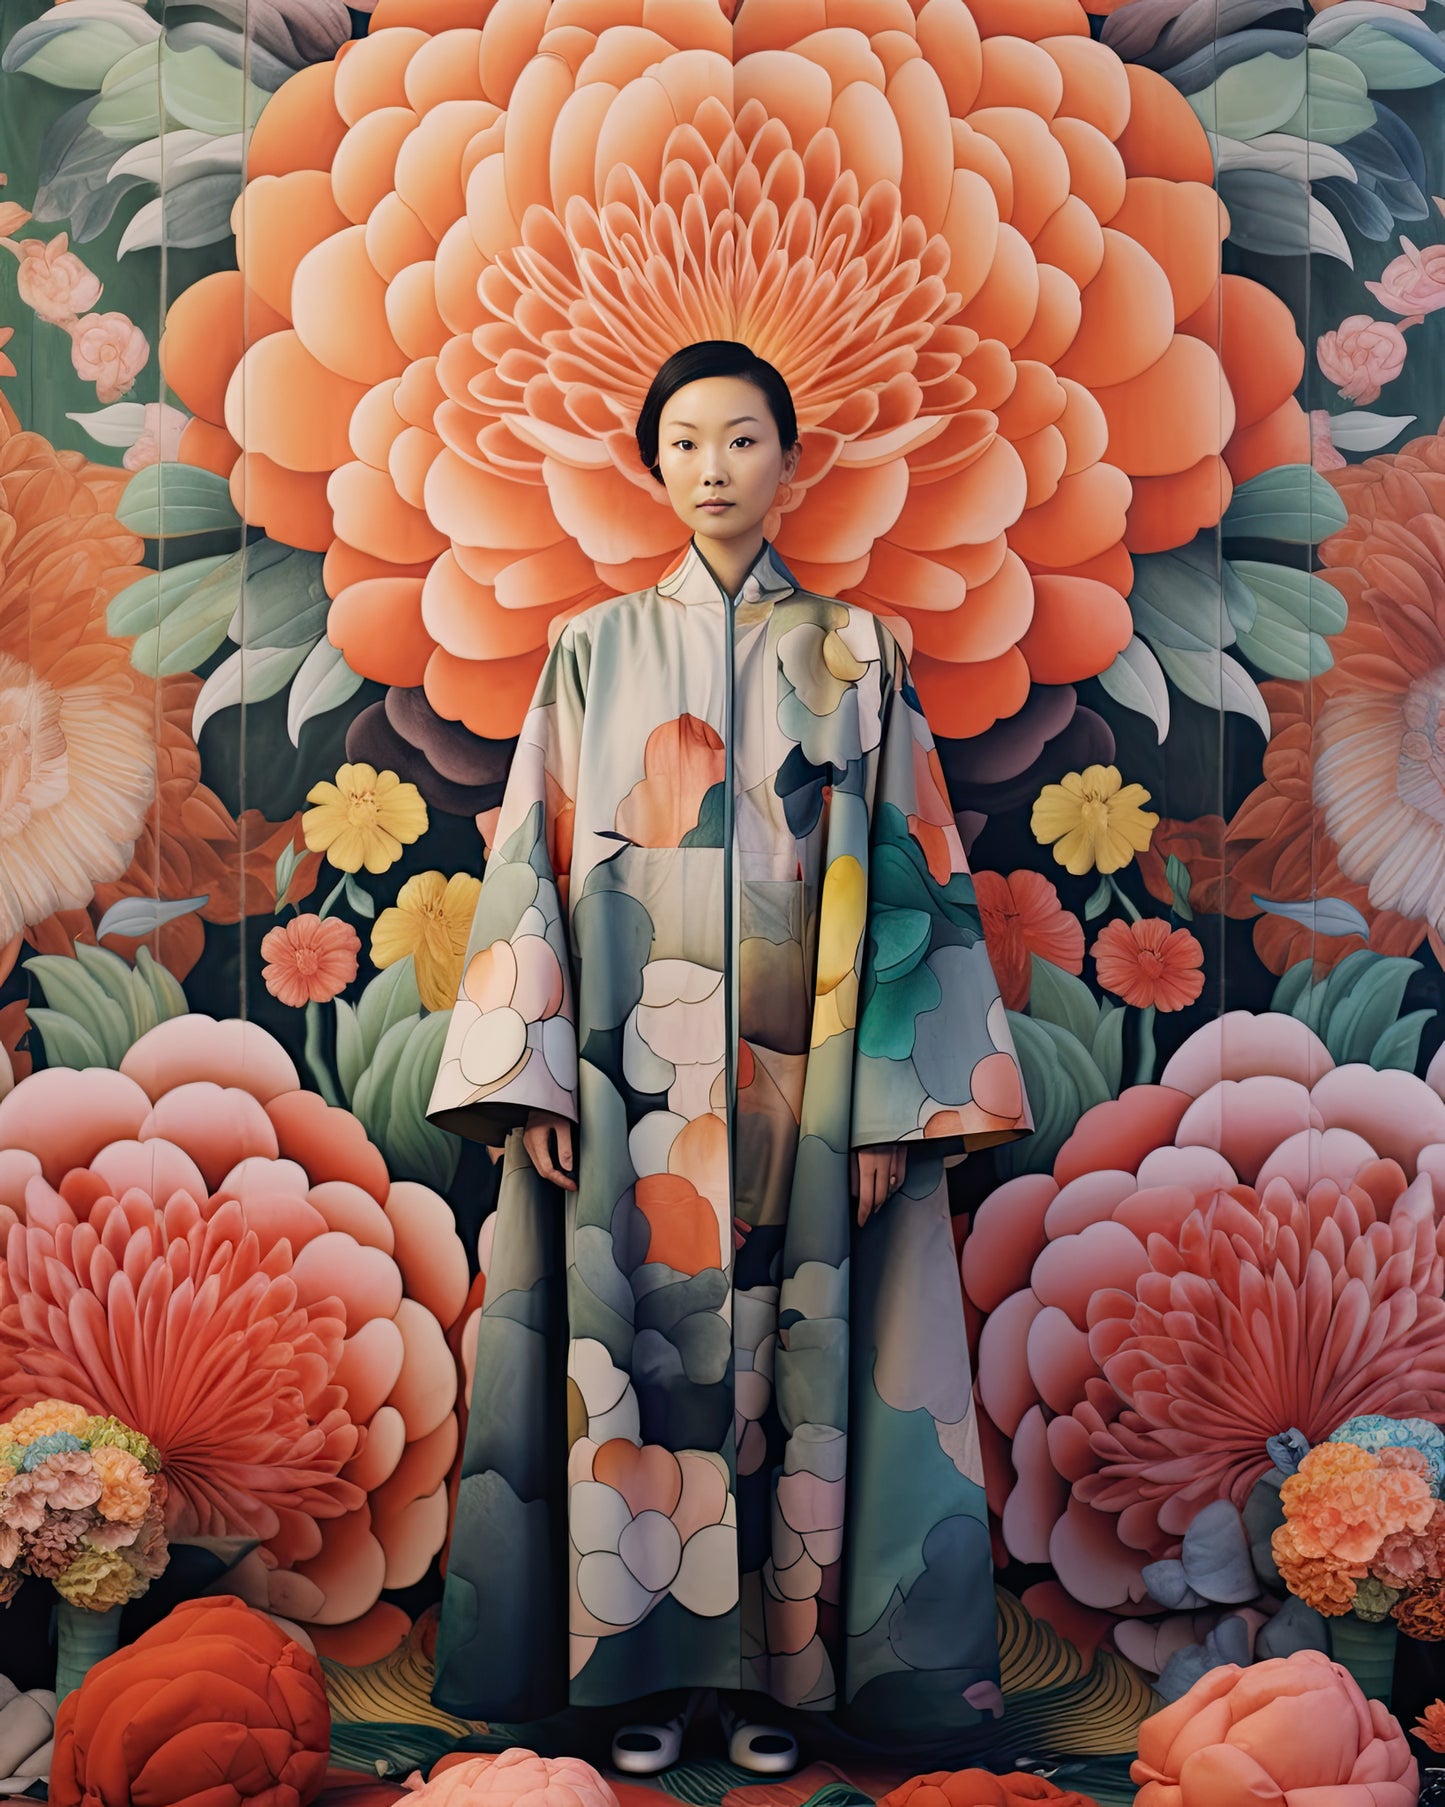 Fine art print featuring a woman dressed in a traditional kimono with vibrant floral patterns, standing against a background of large, richly colored flowers in shades of orange and pink. This art print is a stunning example of an artwork print.